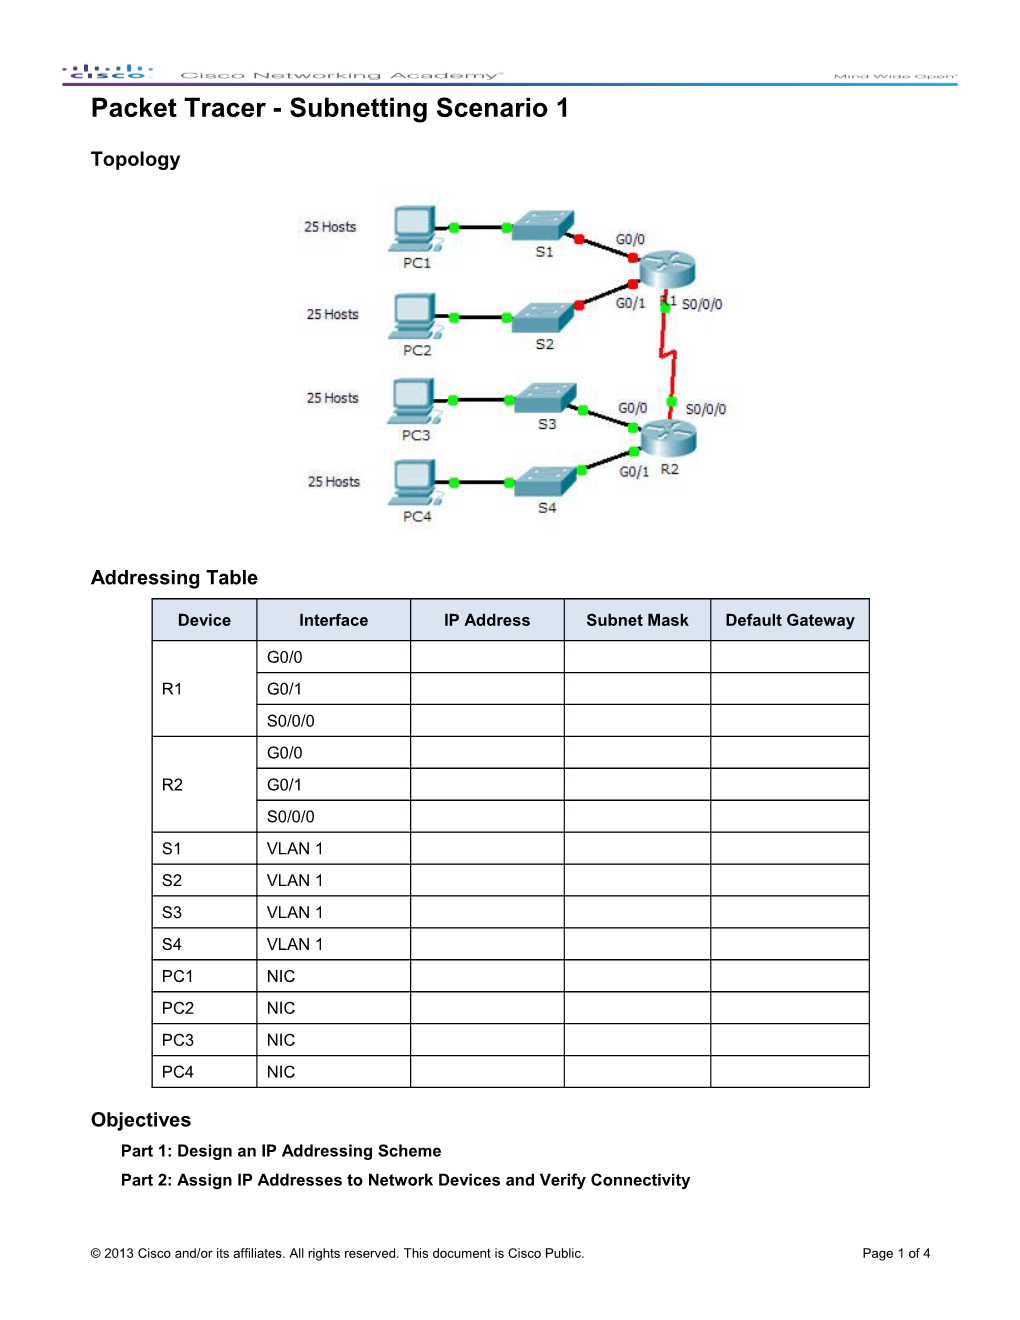 Packet Tracer - Subnetting Scenario 1